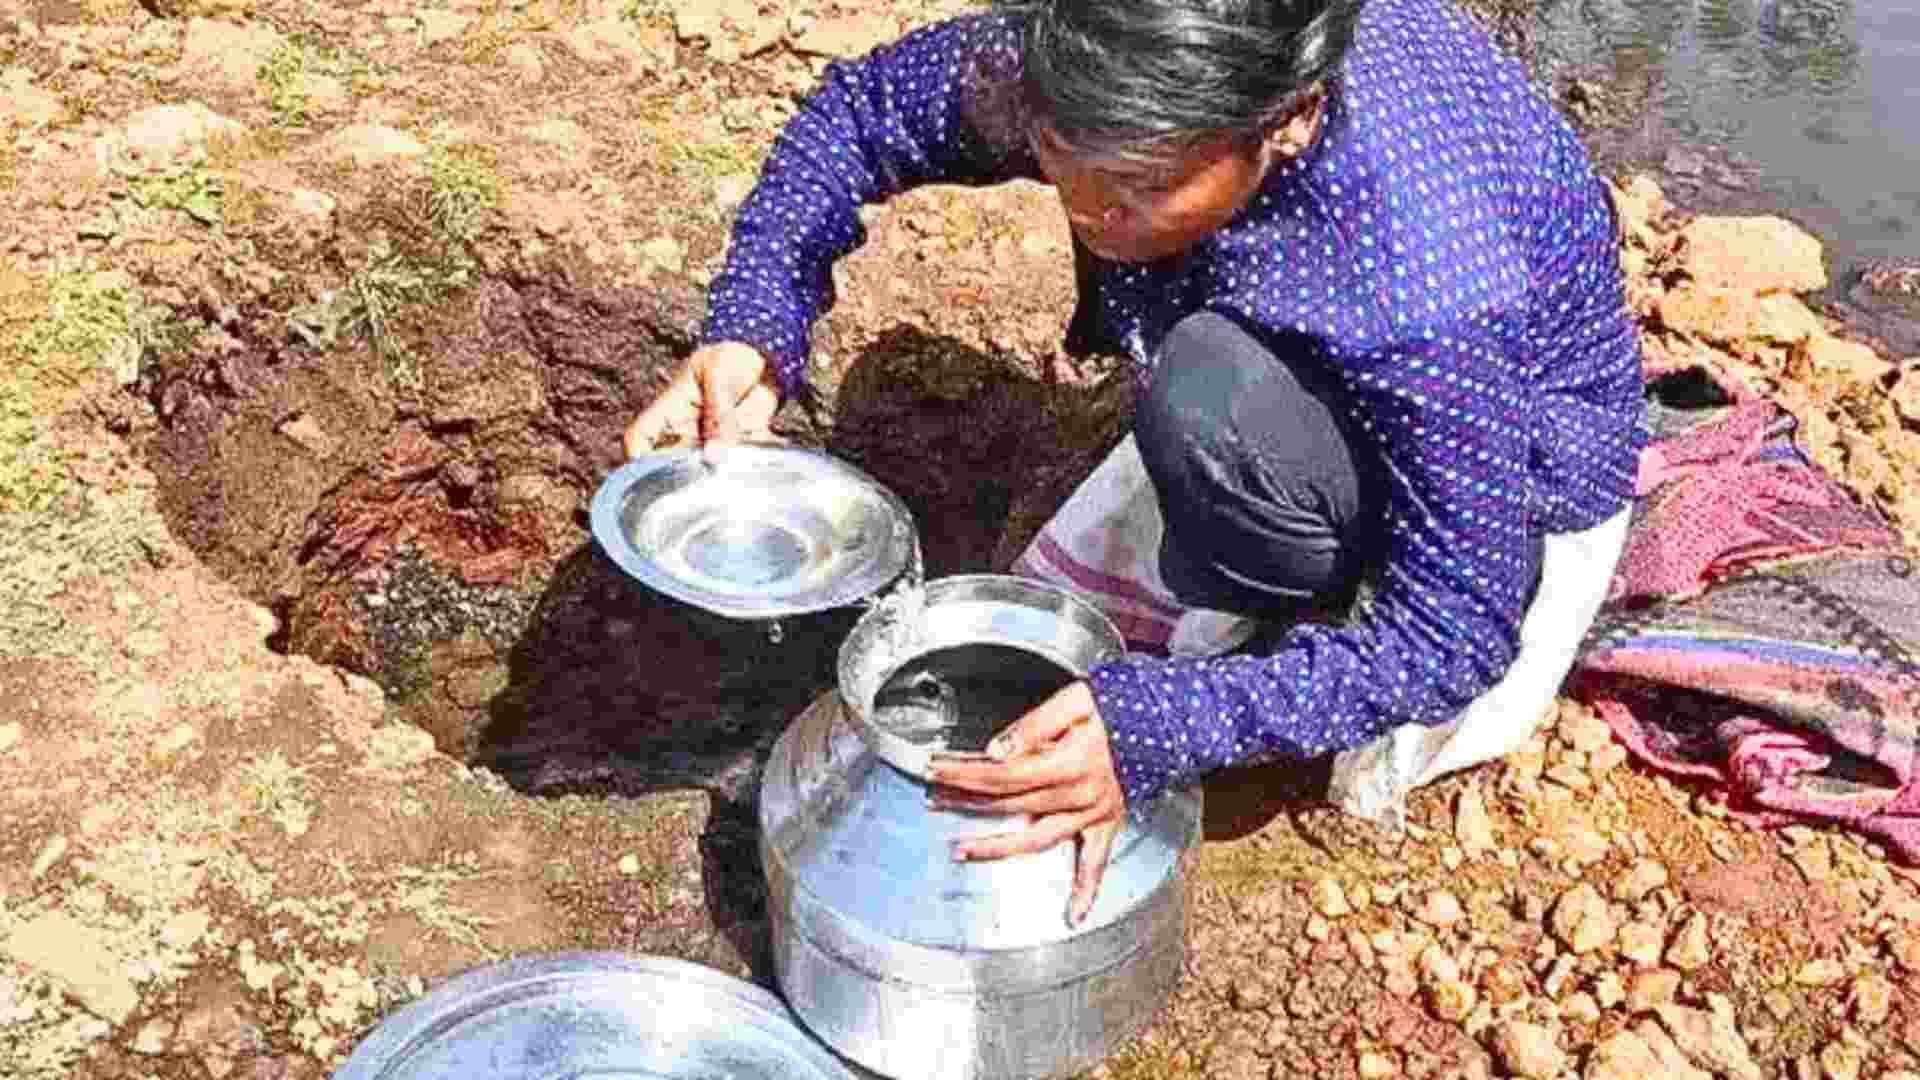 Maharashtra: Locals In Amravati District’s Village Forced To Drink Dirty Water